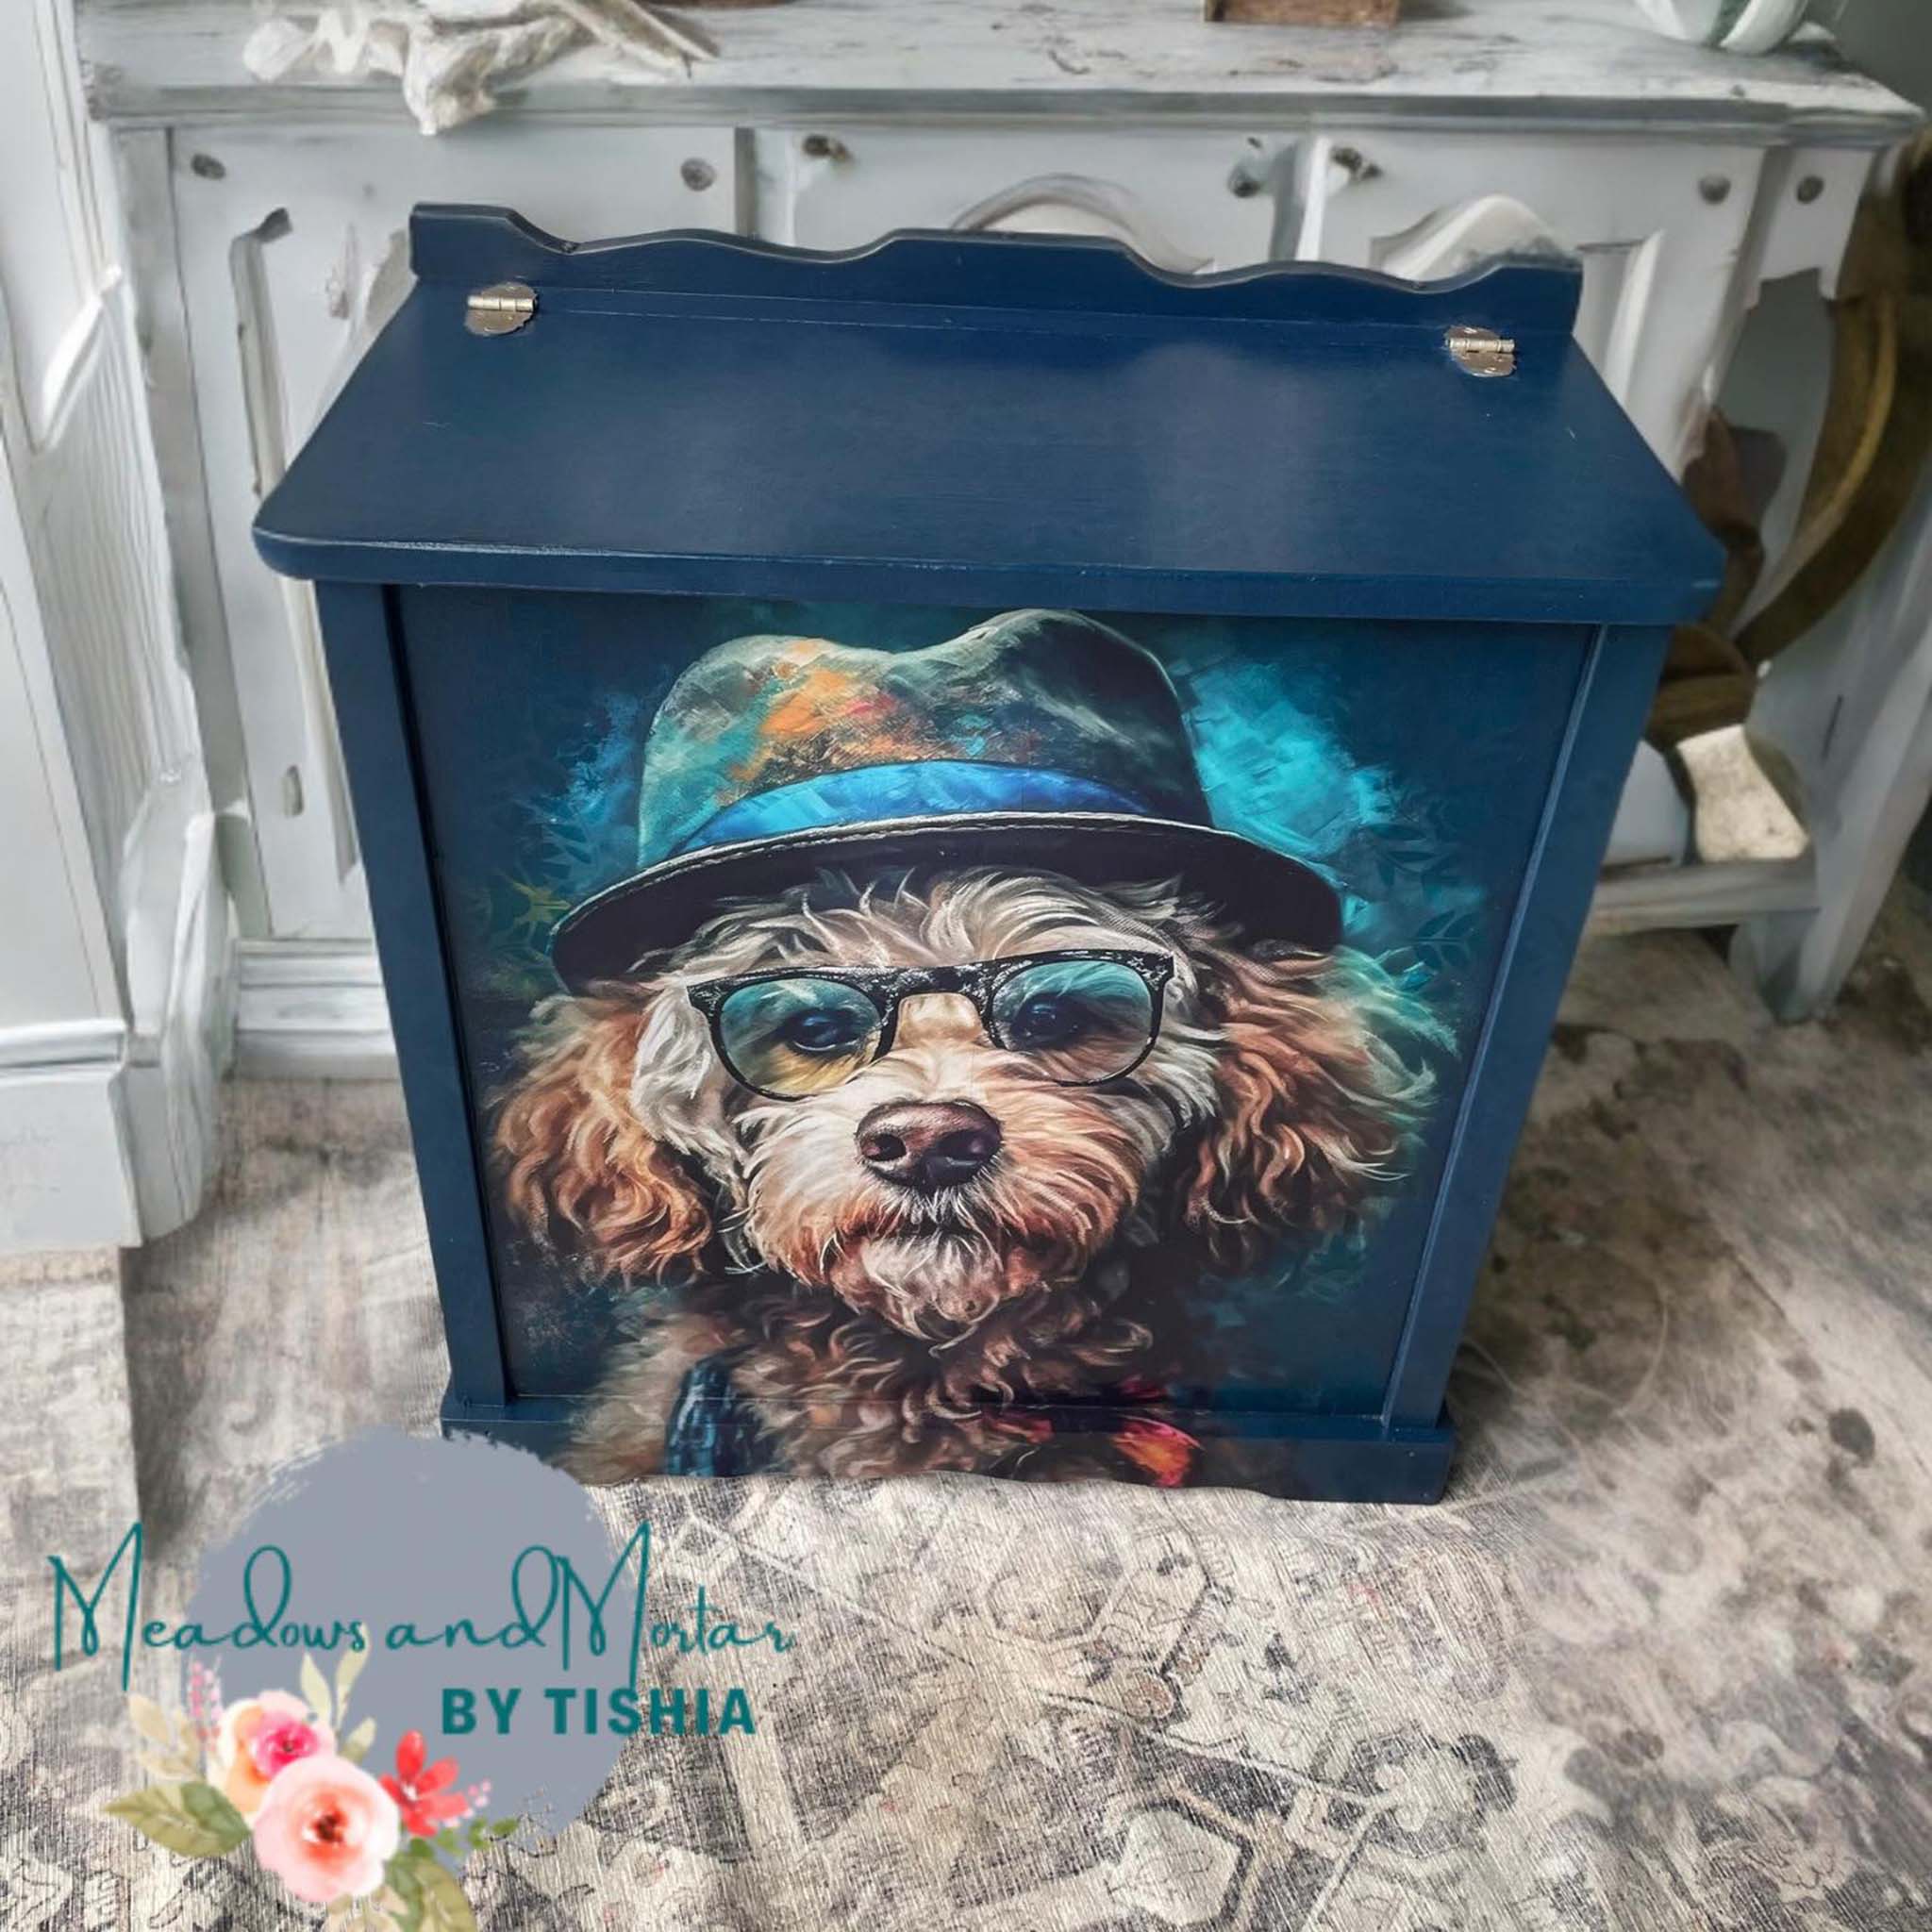 A vintage wood storage box refurbished by Meadows and Mortar by Tishia is painted blue and features Whimsykel's Doodle Bug tissue paper on it.